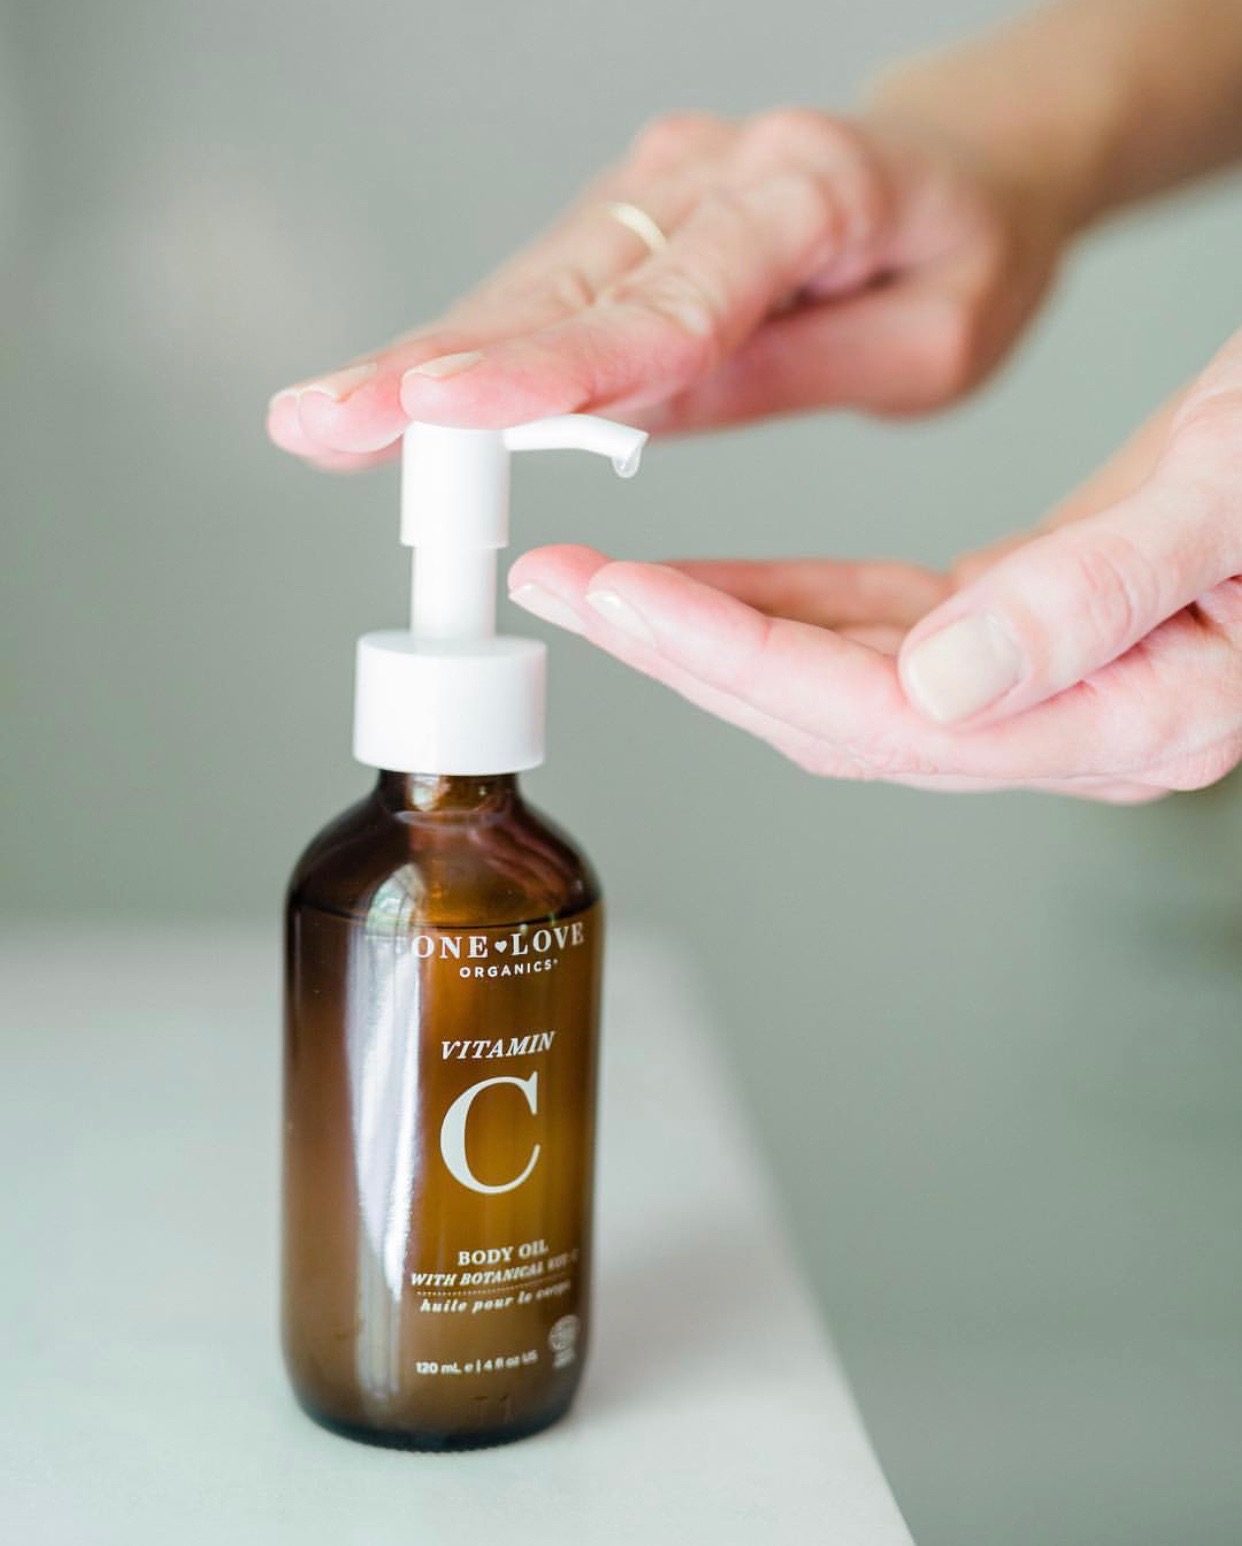 A bottle of body oil on the counter with hands pressing down the pump